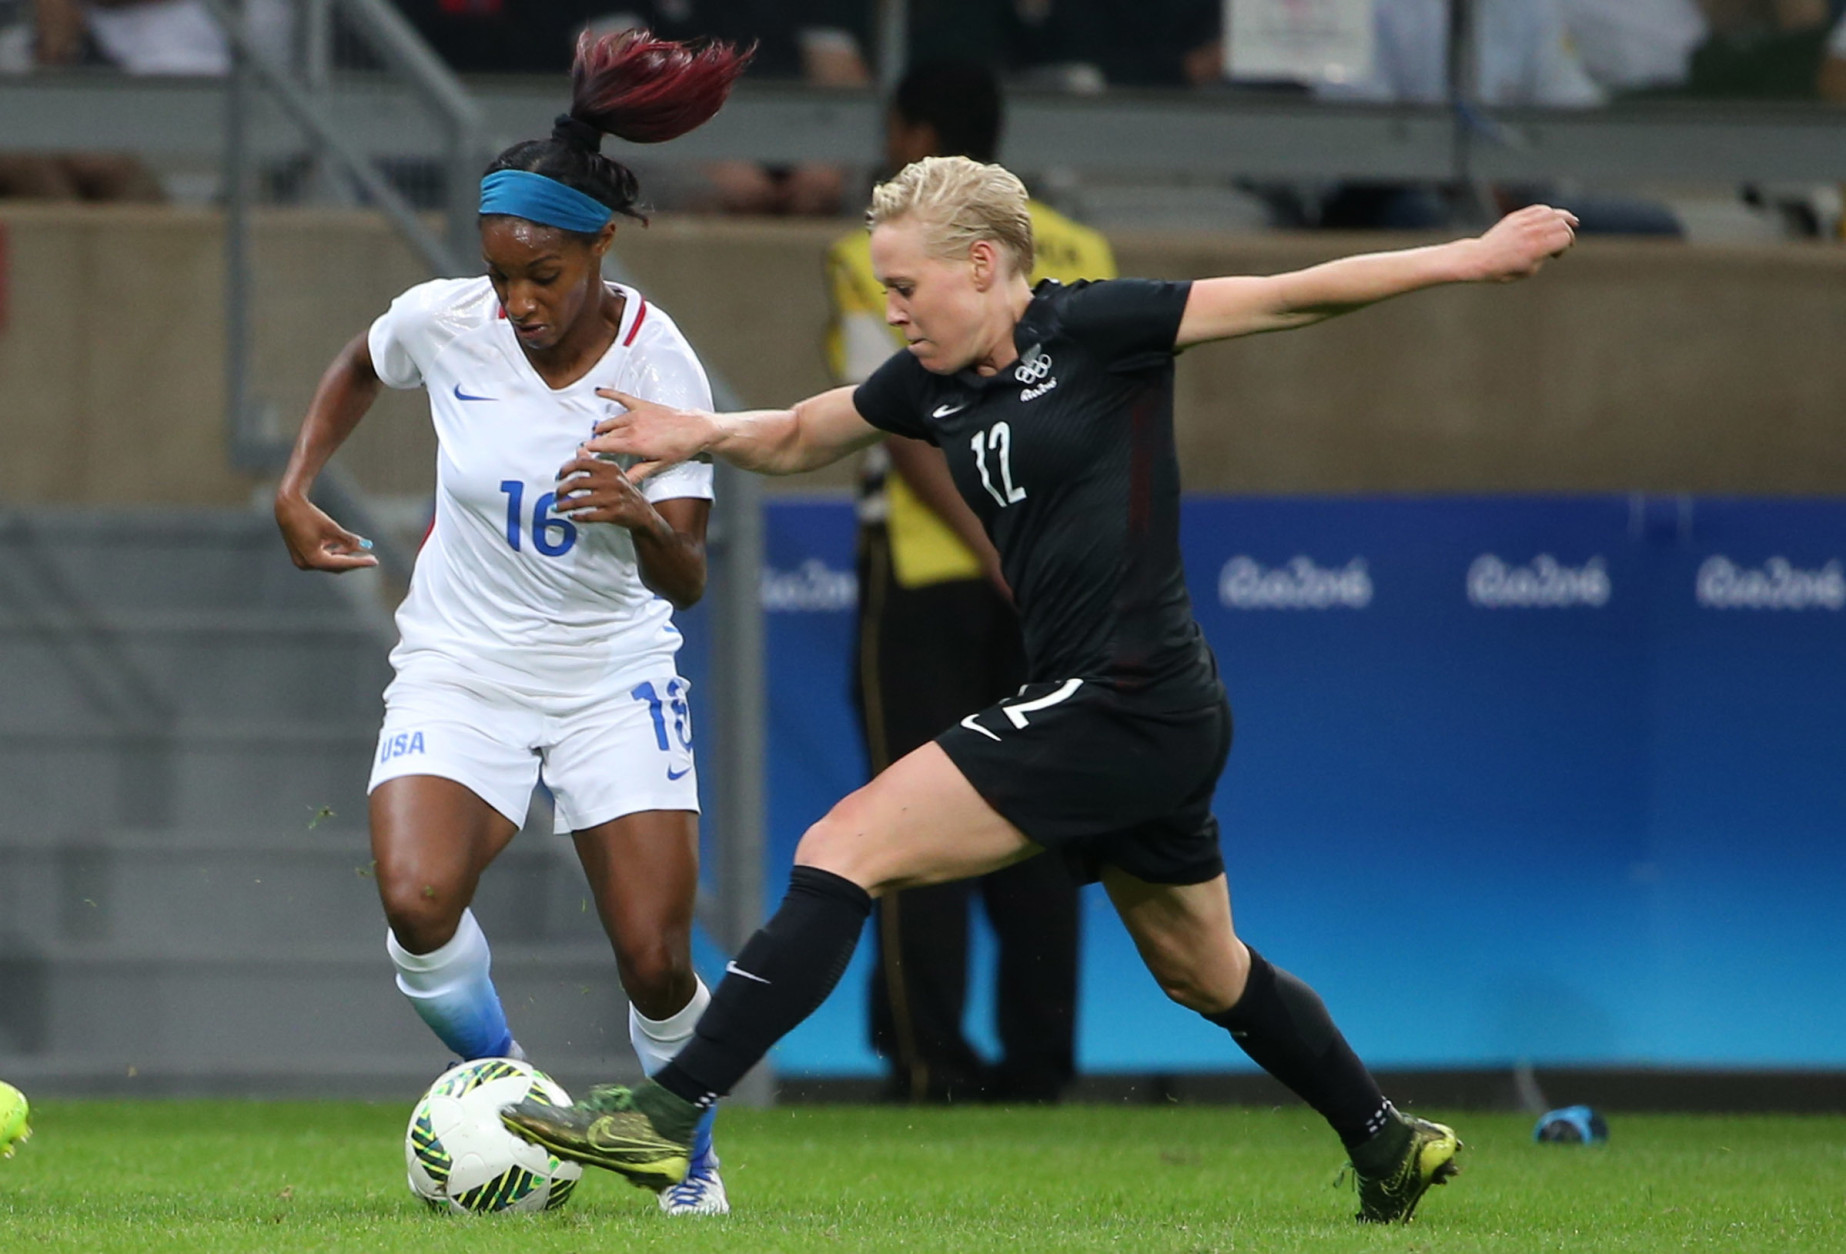 United States' Crystal Dunn, left, and New Zealand's Betsy Hassett vie for the ball during a women's Olympic football tournament match at the Mineirao stadium in Belo Horizonte, Brazil, Wednesday, Aug. 3, 2016. United States won 2-0. (AP Photo/Eugenio Savio)